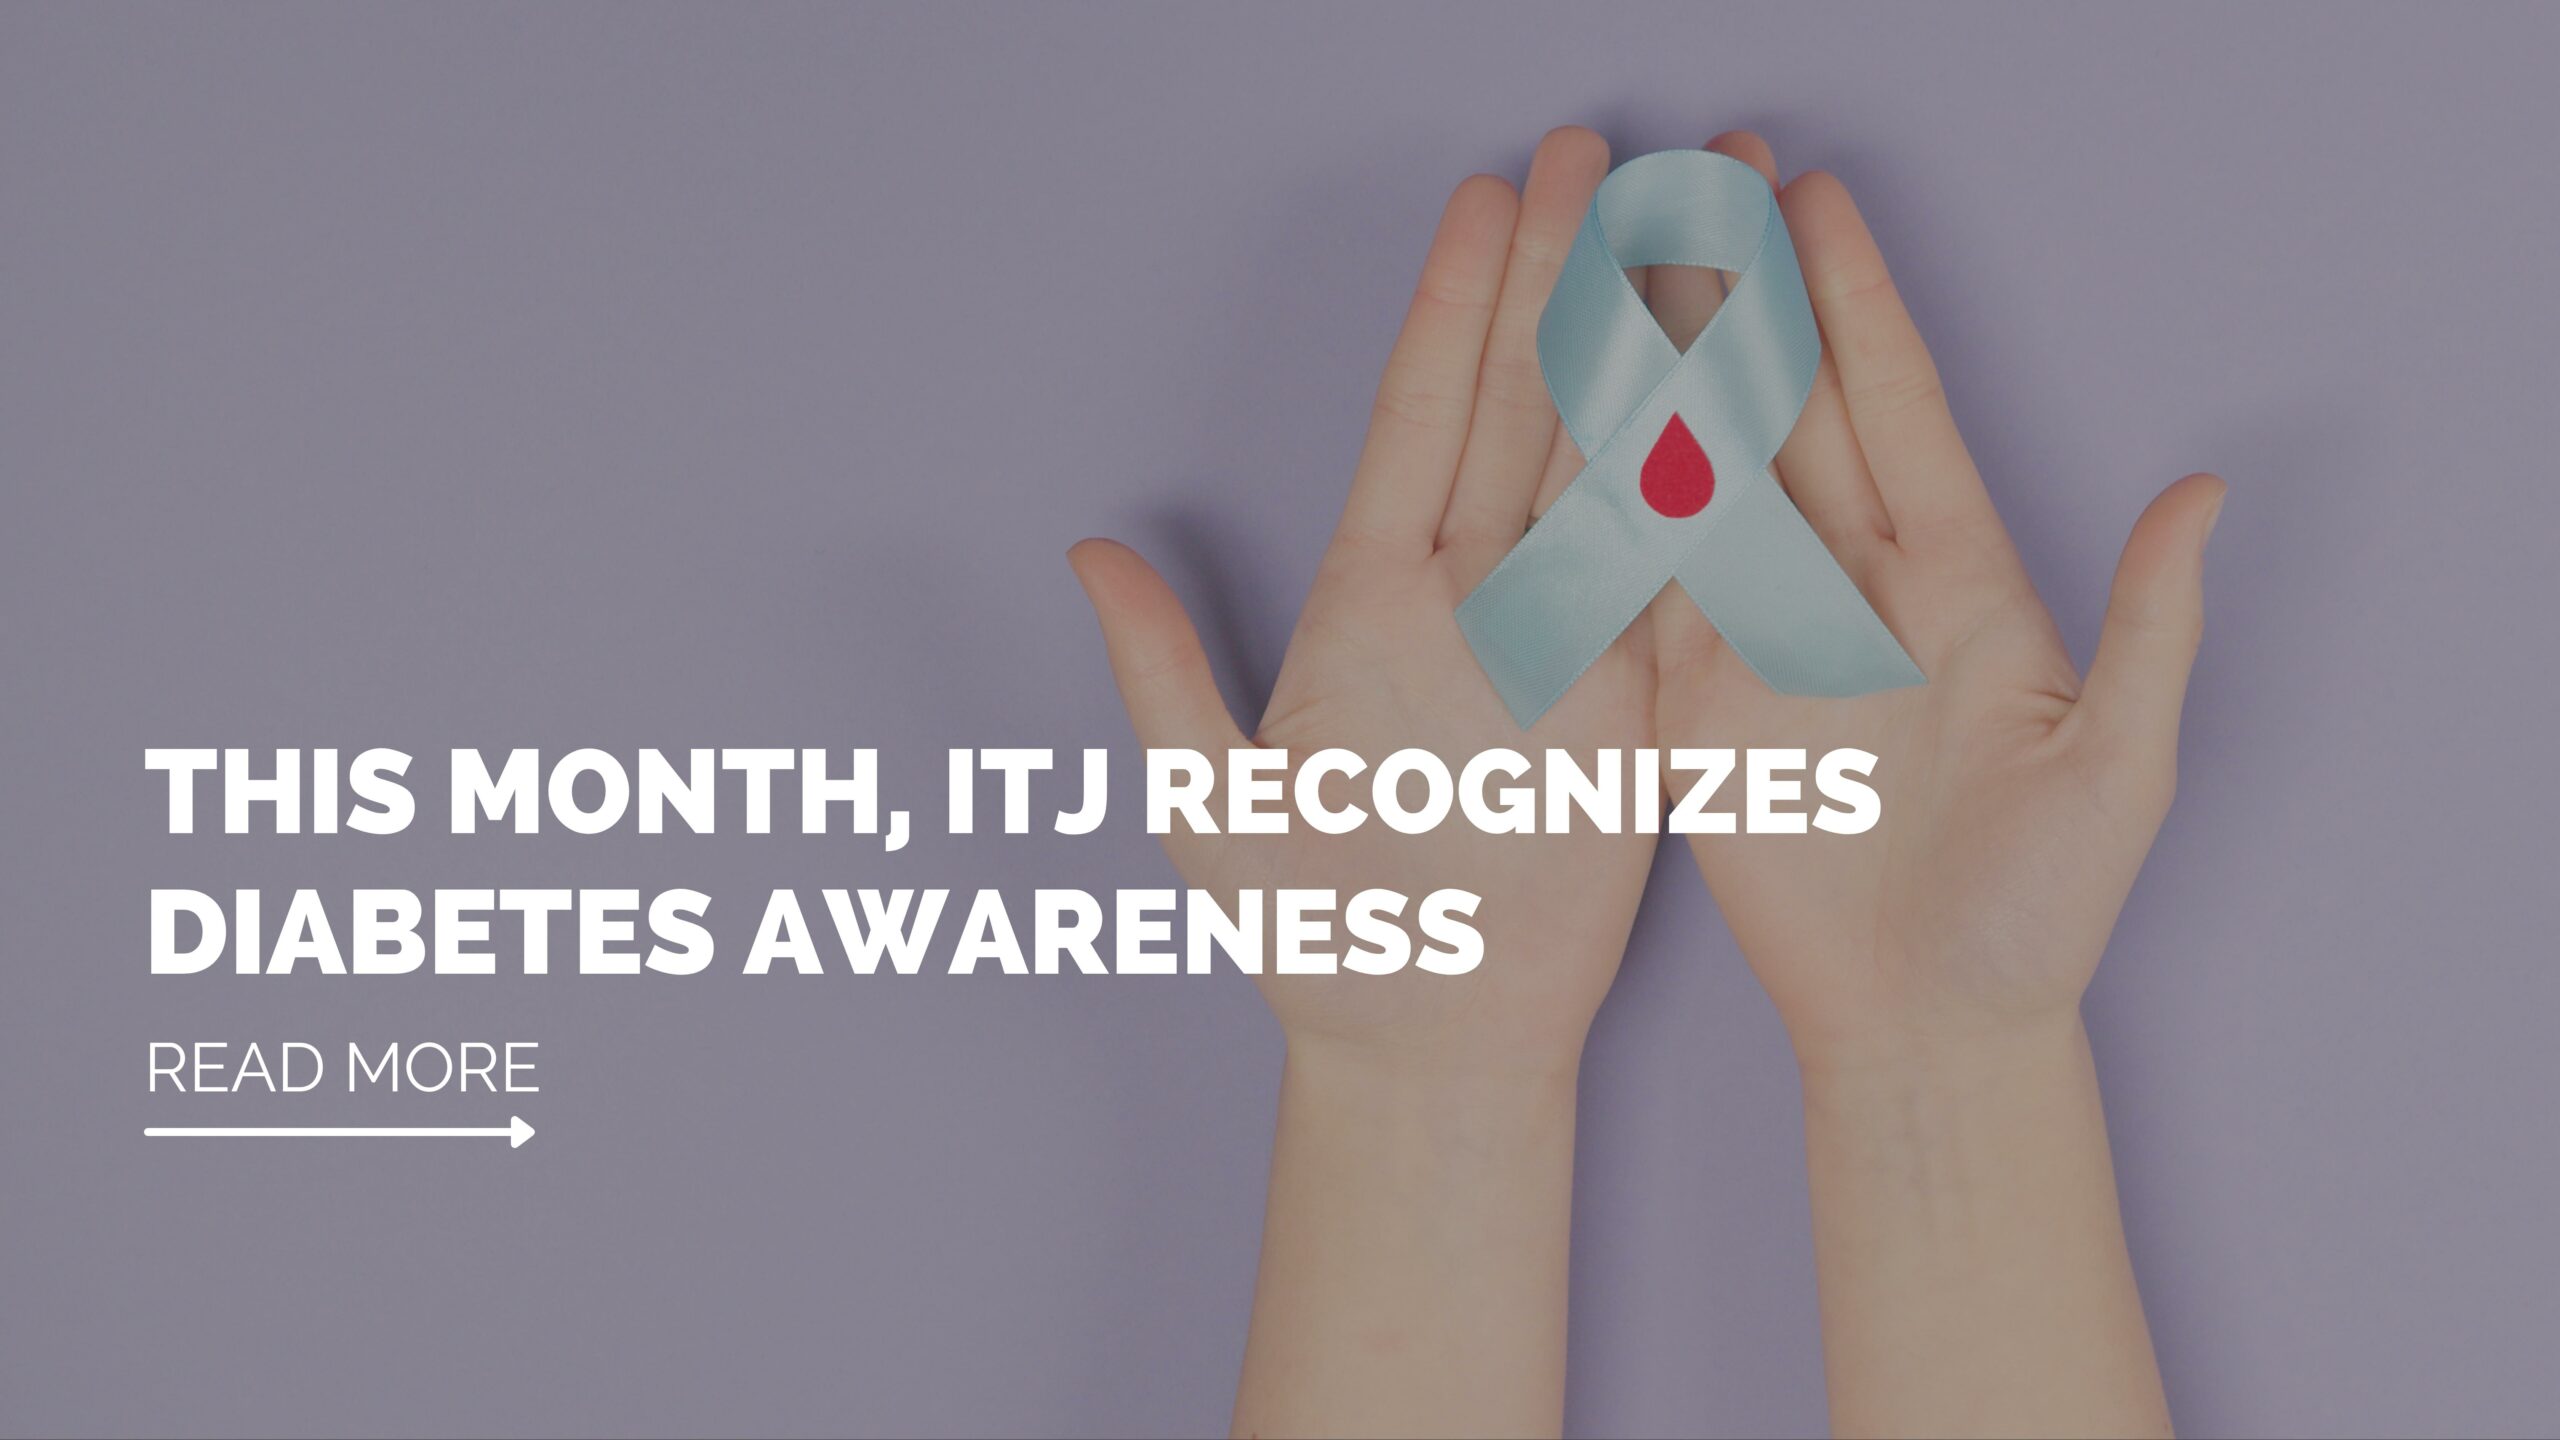 Diabetes awareness month with ITJ